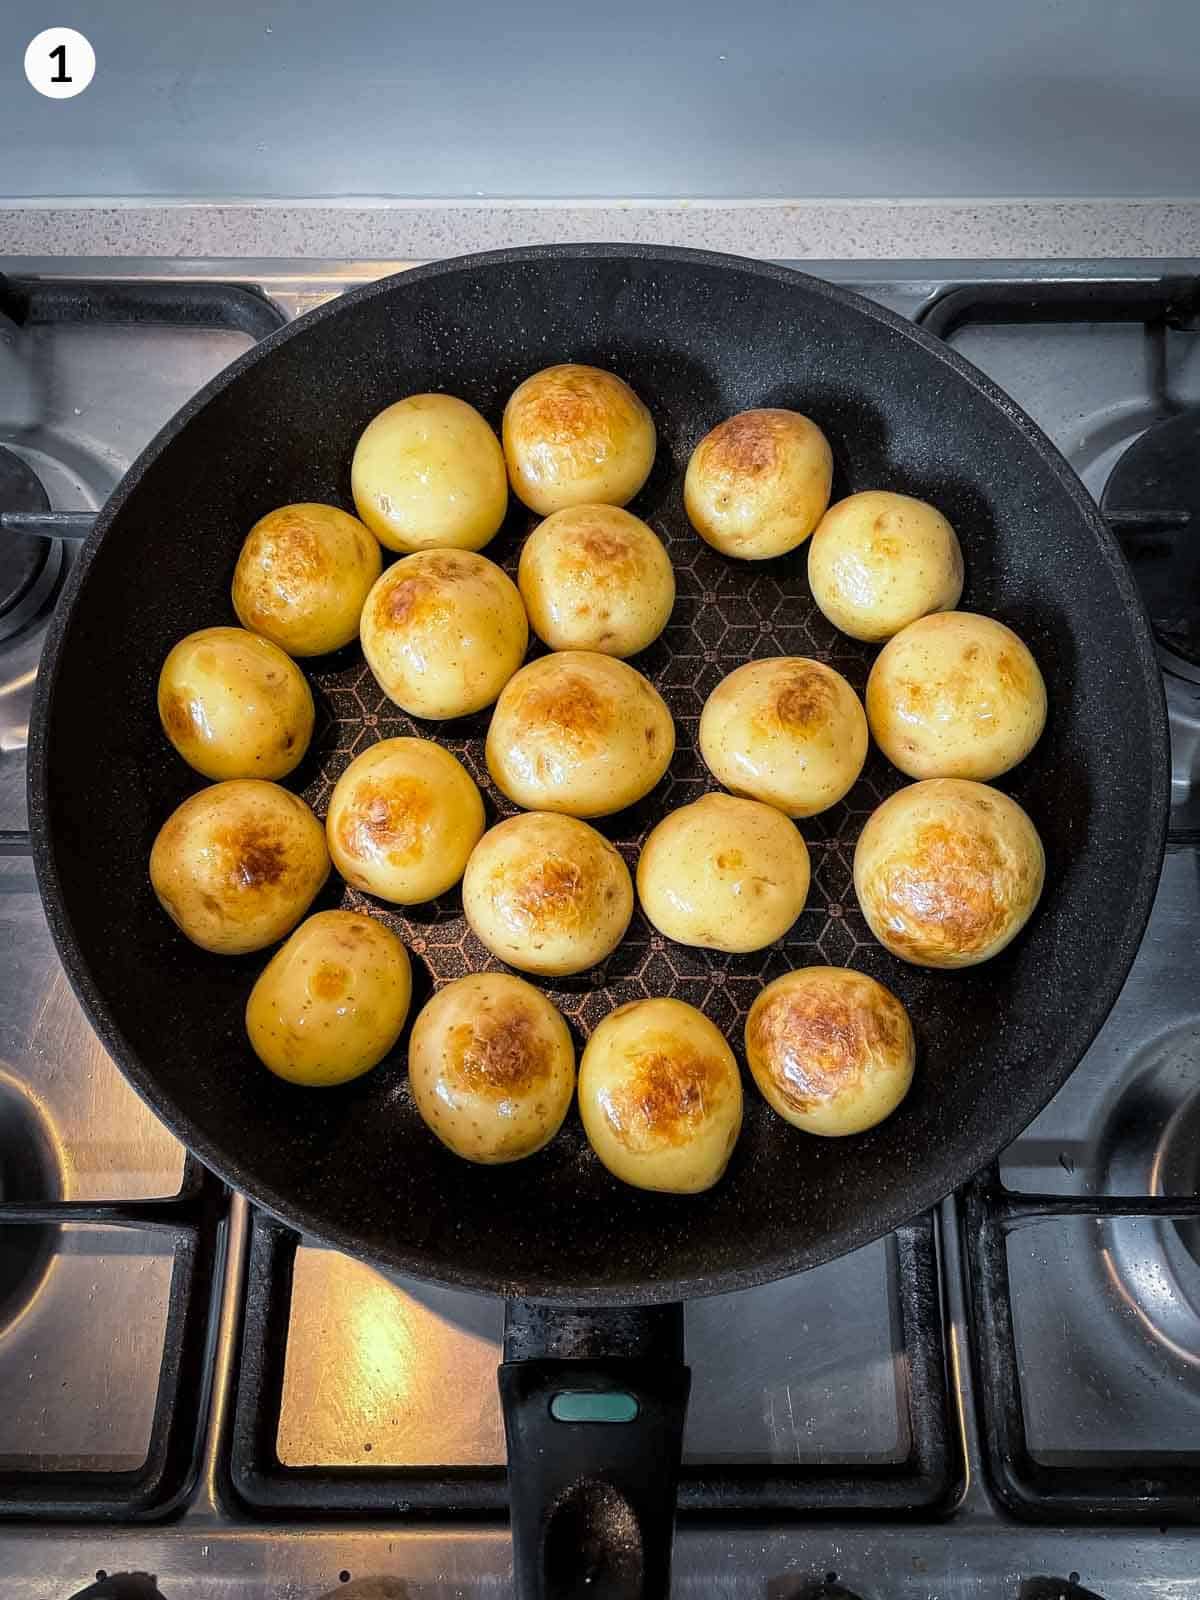 Pan frying whole baby potatoes in a fry pan on a stove top